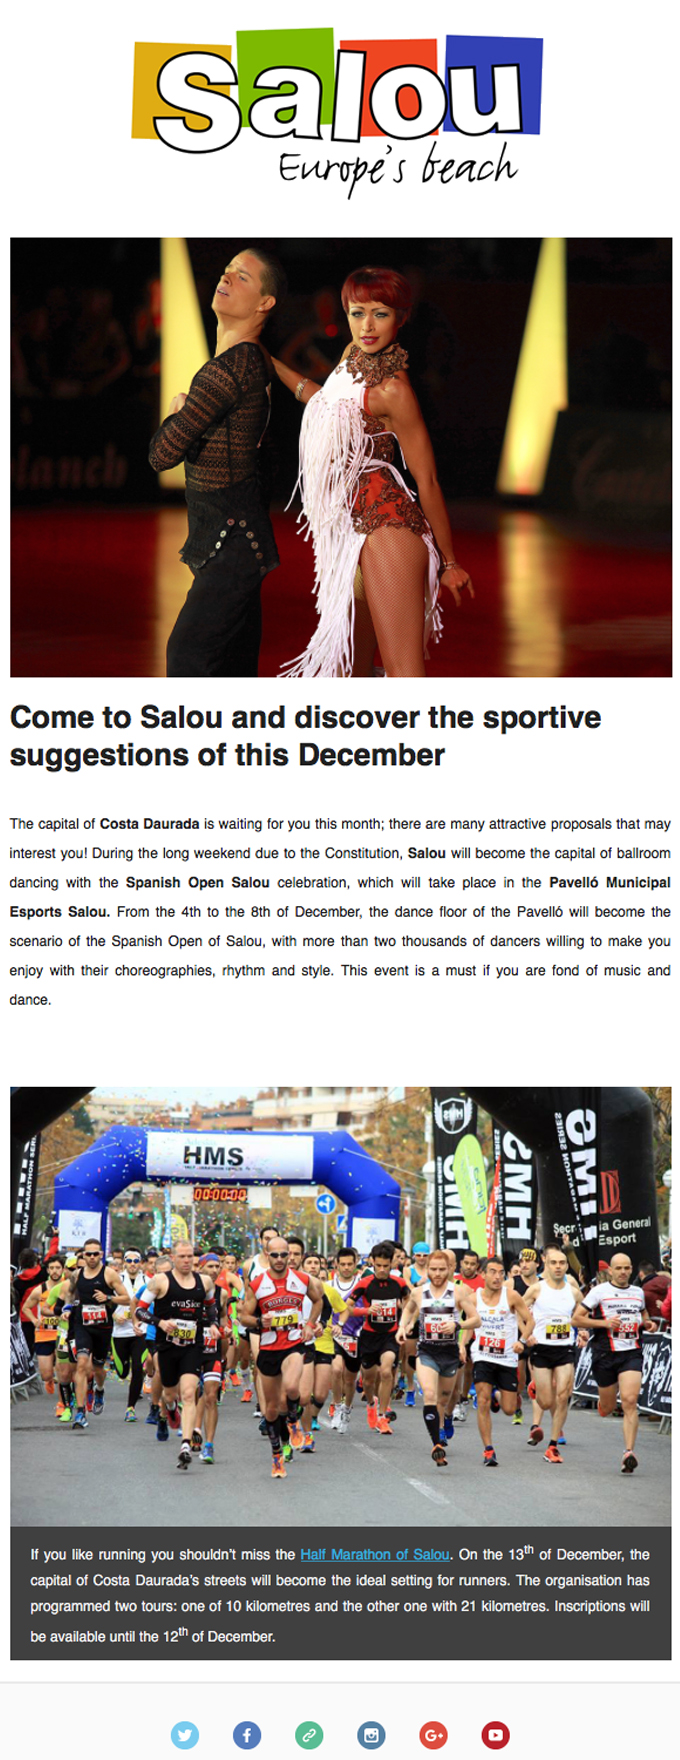 Come to Salou and discover the sportive suggestions of this December